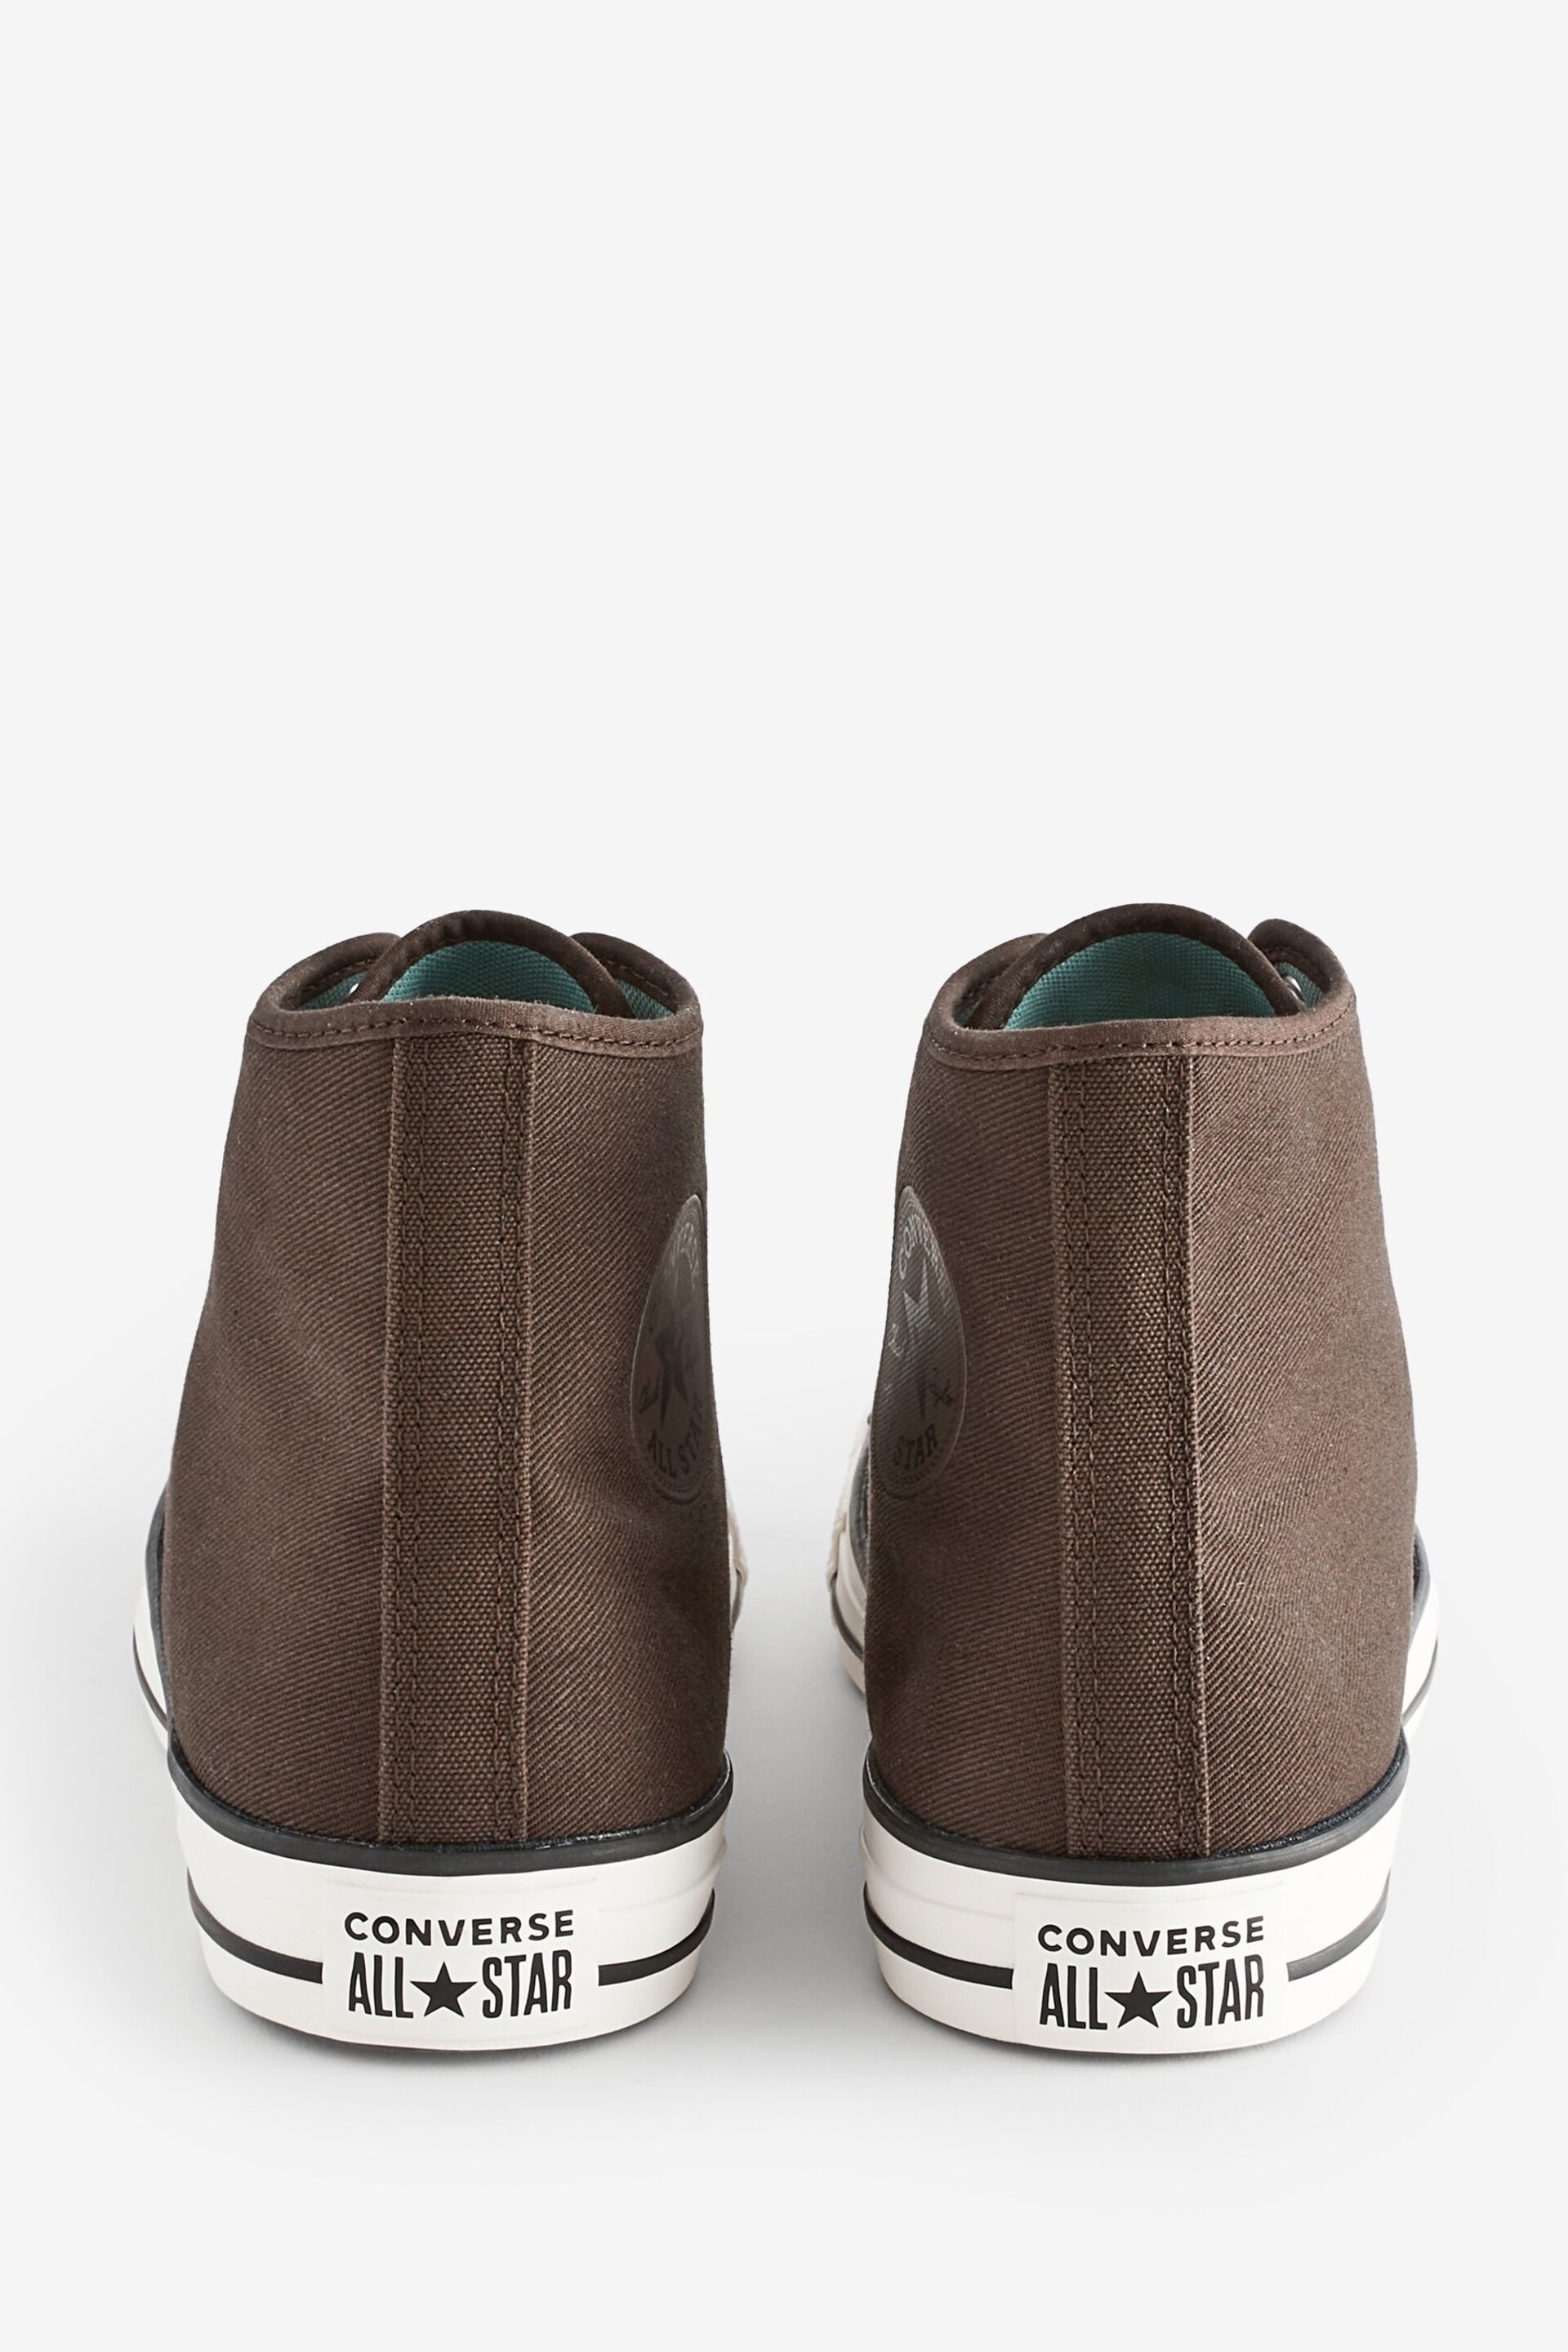 Converse Brown Chuck Taylor All Star High Top Trainers - Image 5 of 12